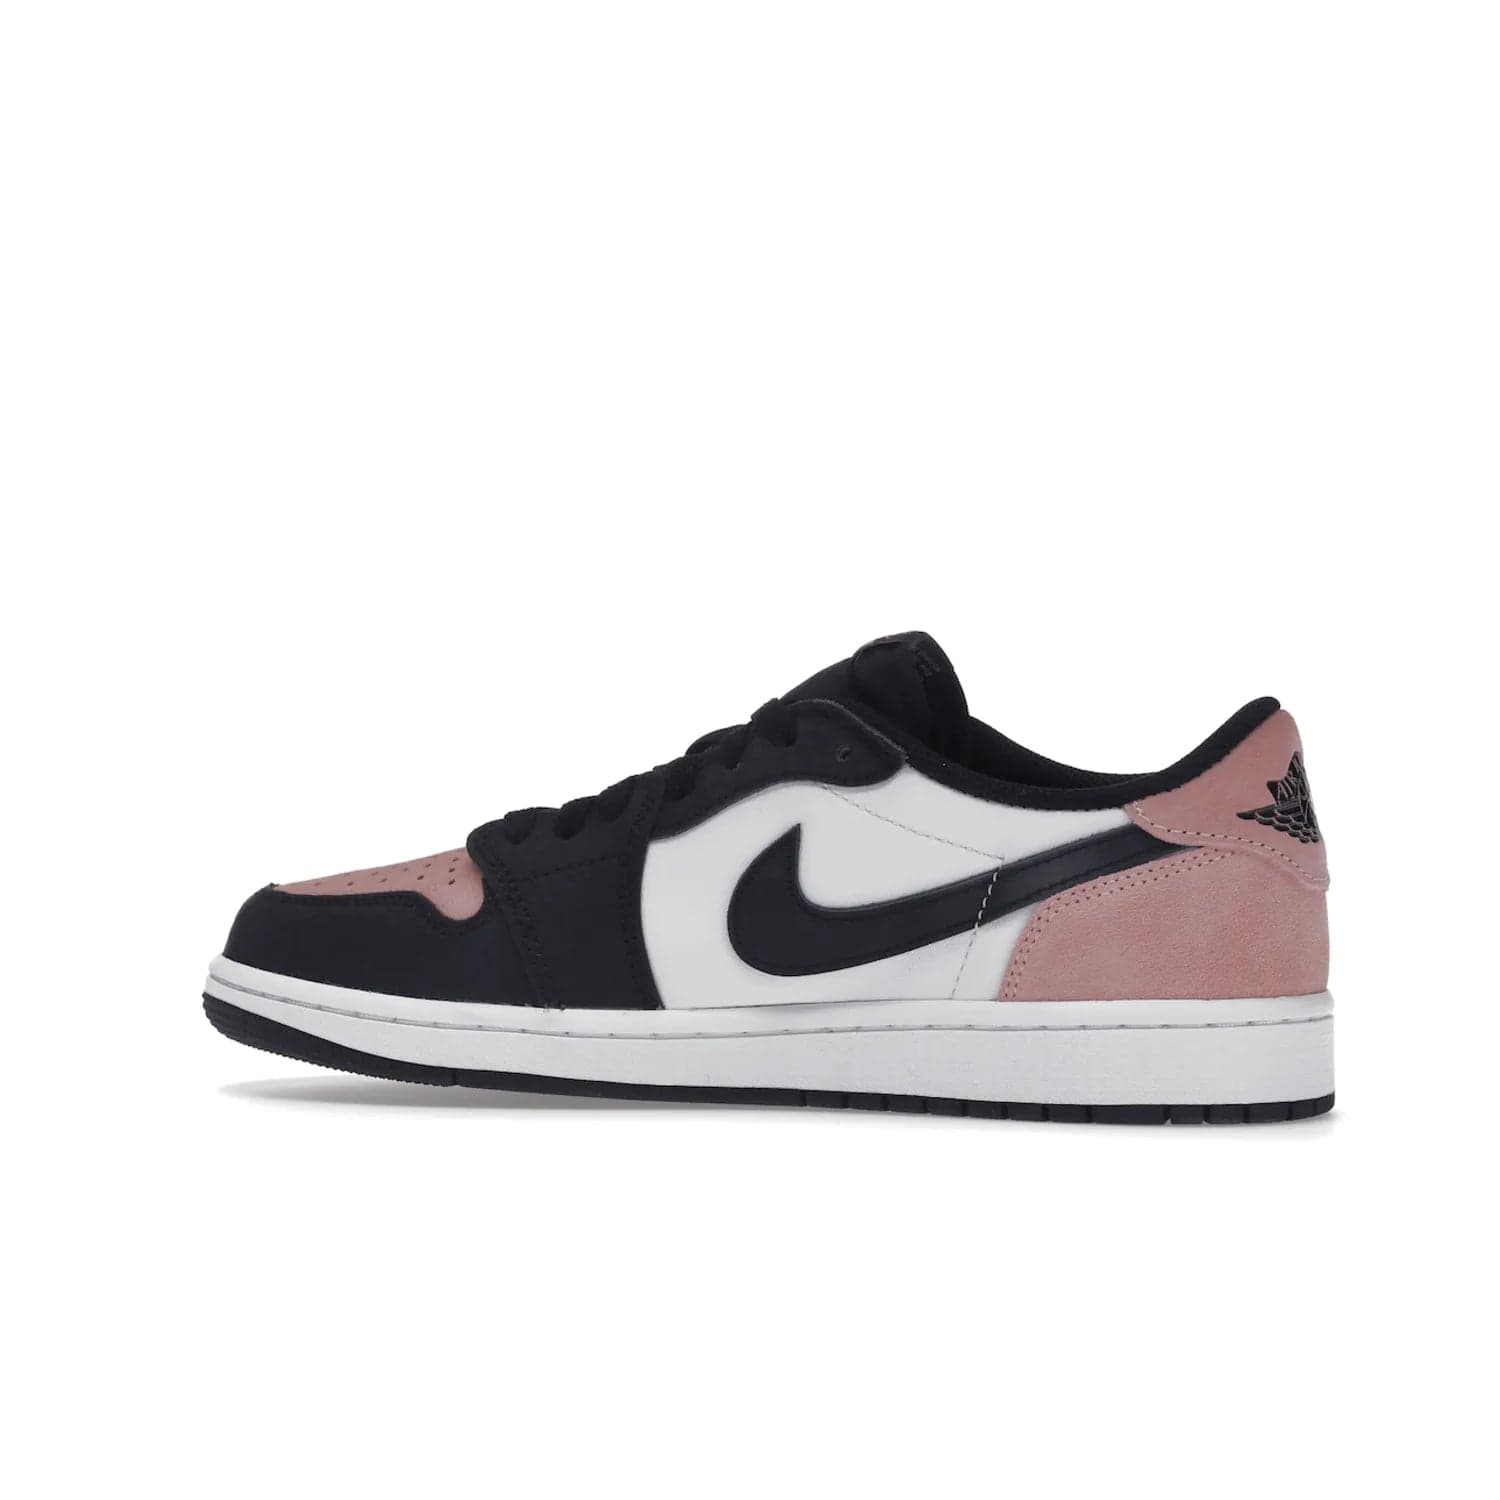 Jordan 1 Low OG Bleached Coral - Image 21 - Only at www.BallersClubKickz.com - Introducing the Air Jordan 1 Low OG Bleached Coral. Constructed with white leather, black cracked leather & Bleached Coral suede. Signature Jordan Wings logo, white Air sole. Get the pack in July 2022 and stand out.